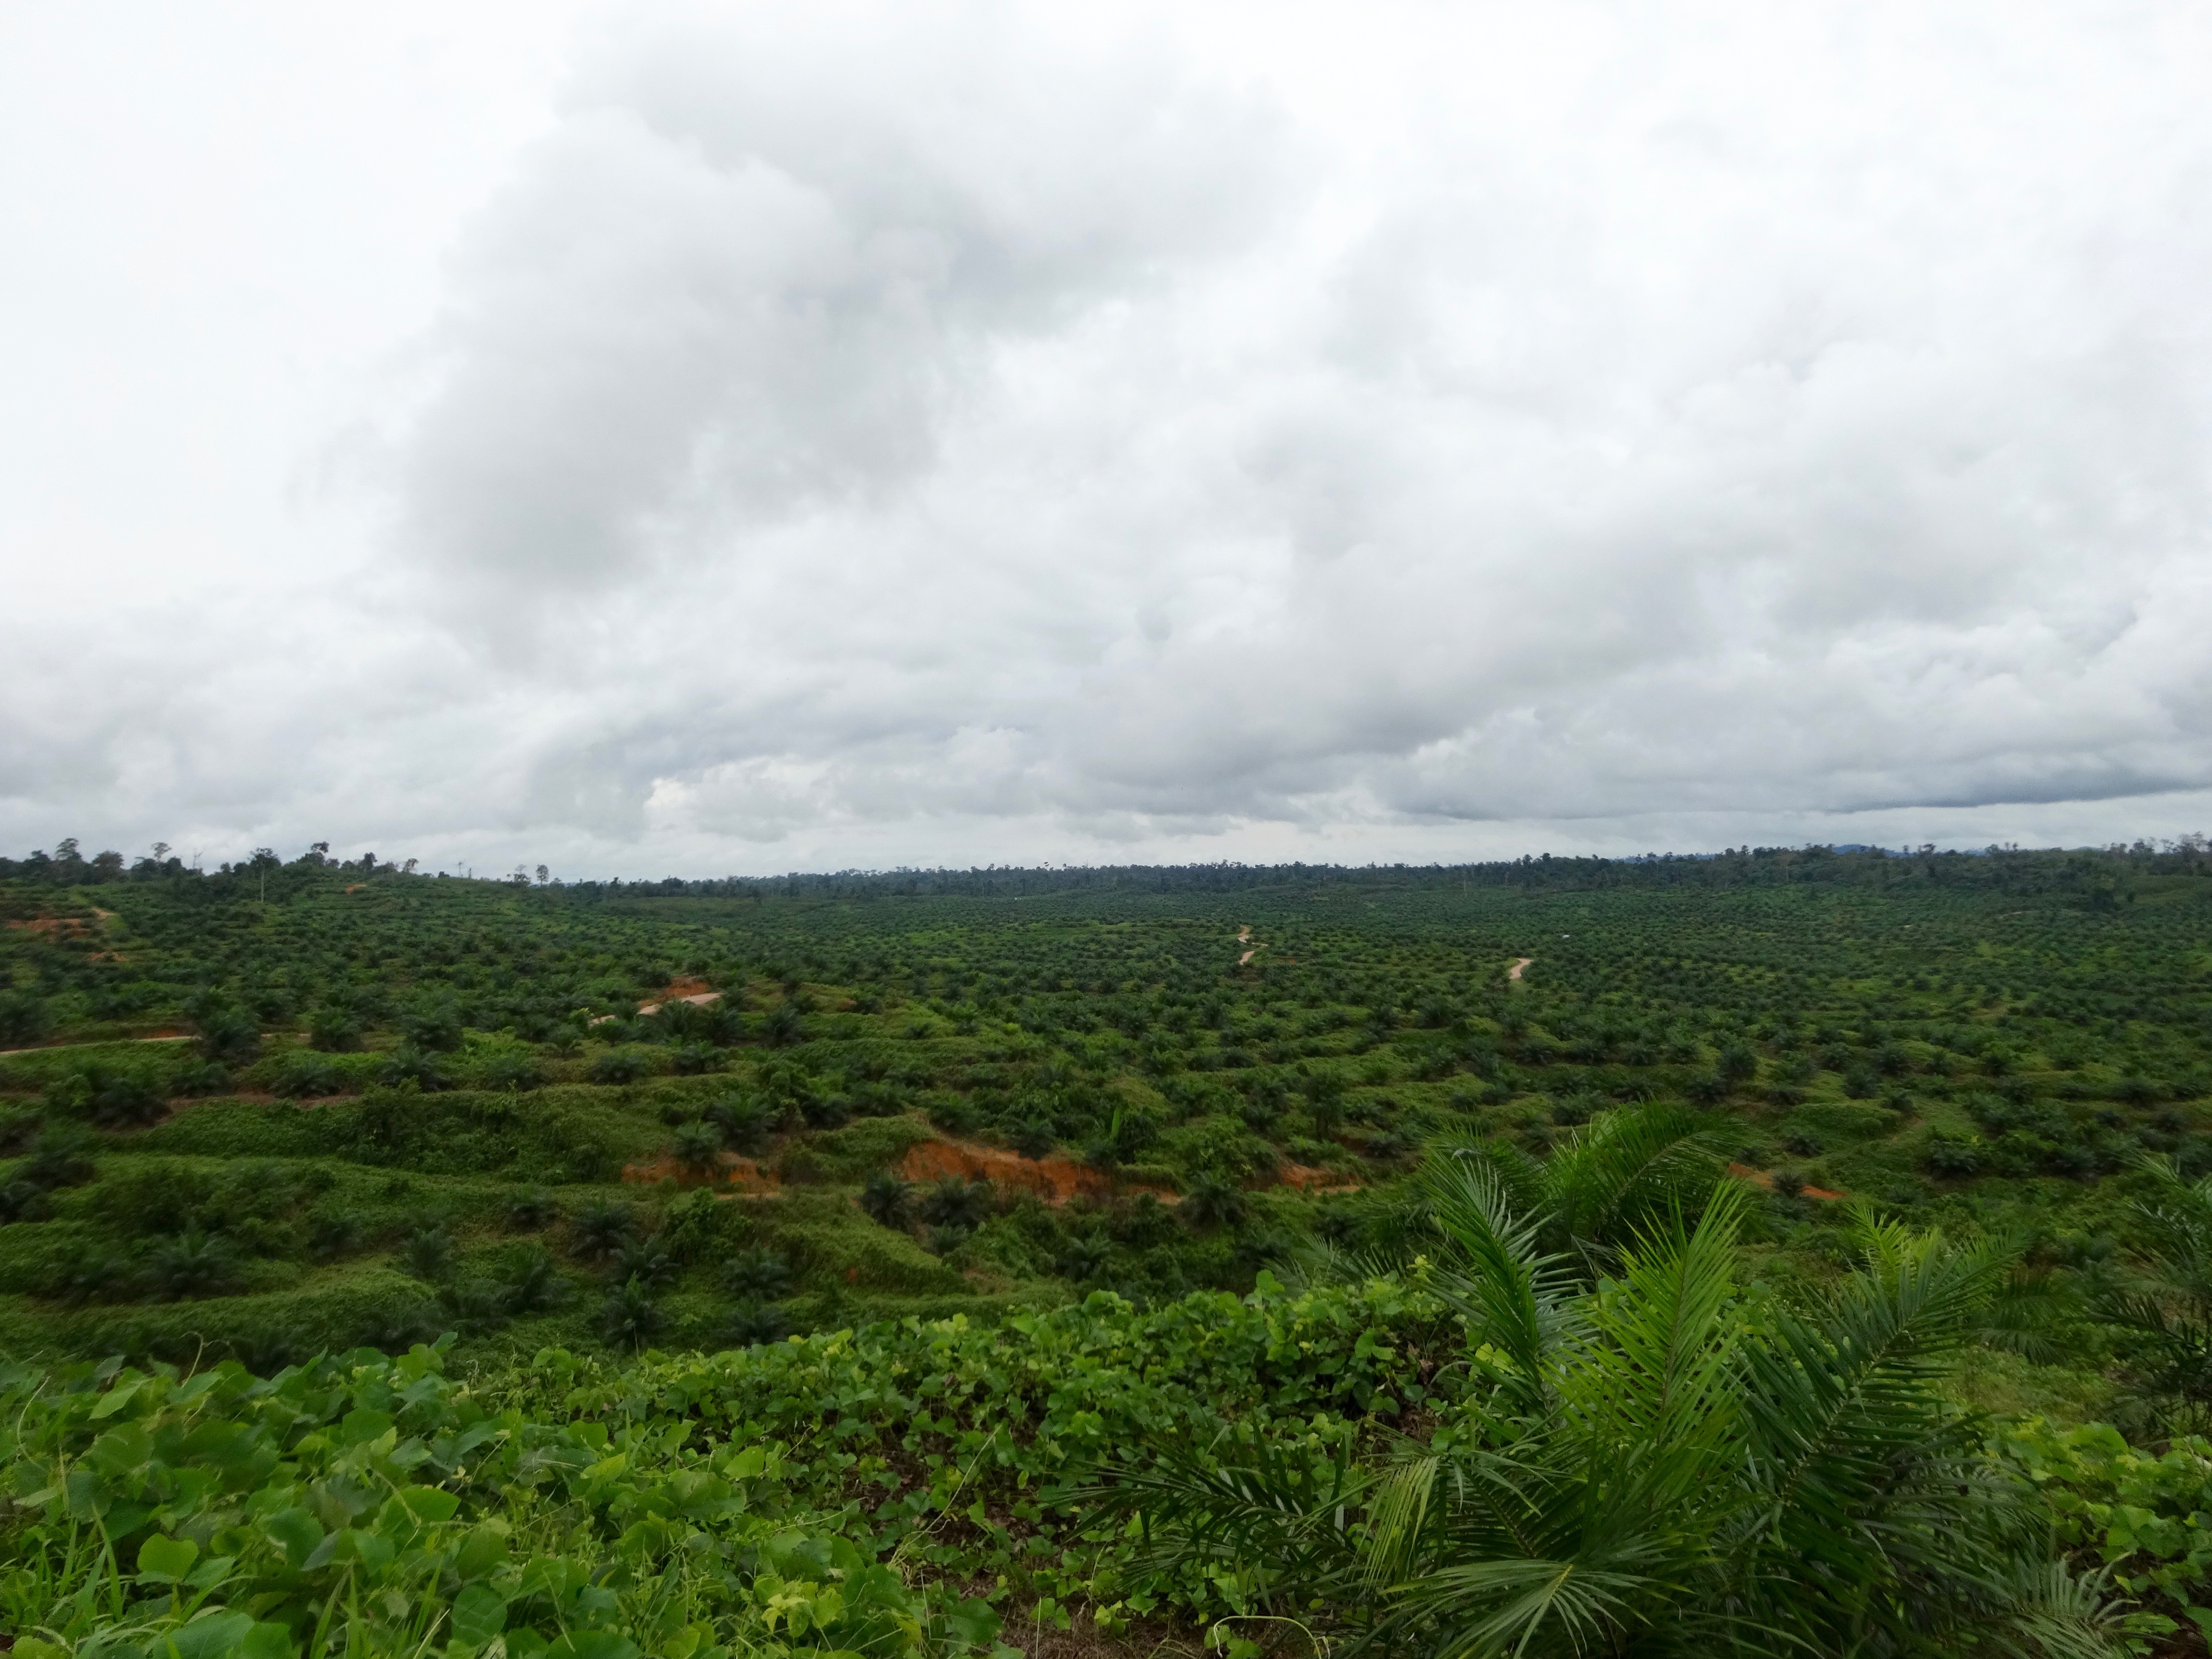 In funding palm oil giants, banks may share in ‘sins of the companies’